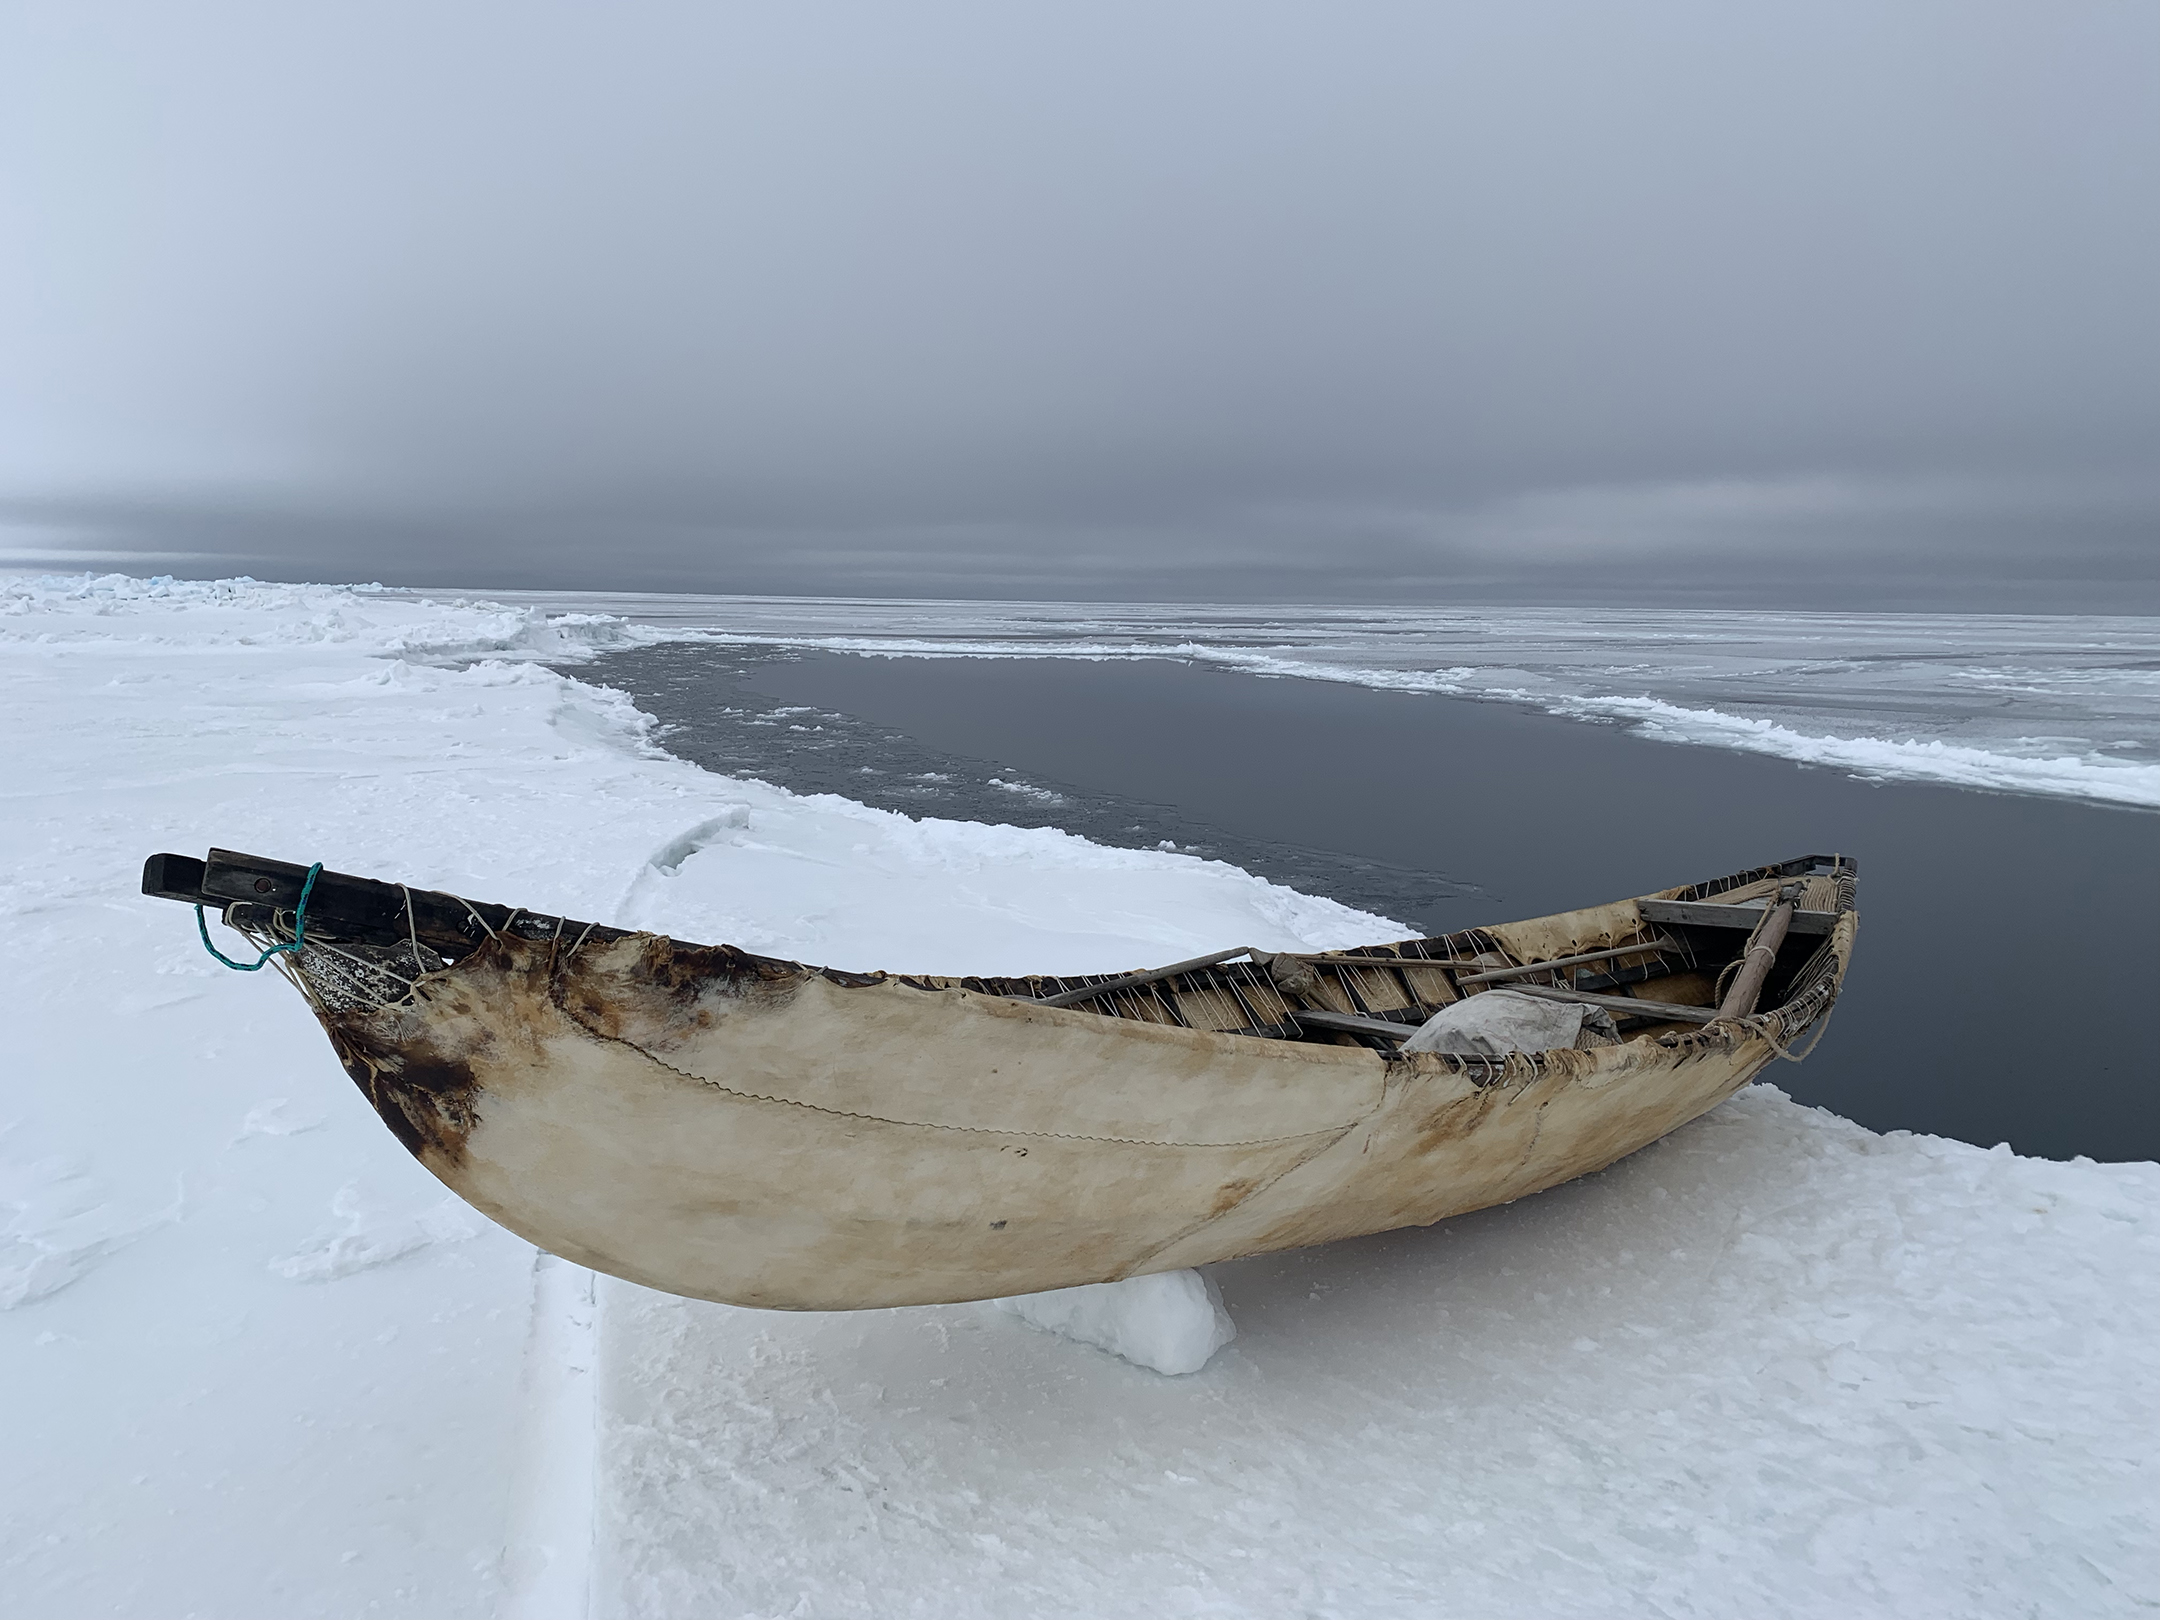 A traditional whaling boat rest on shorefast ice near the coast of Alaska.